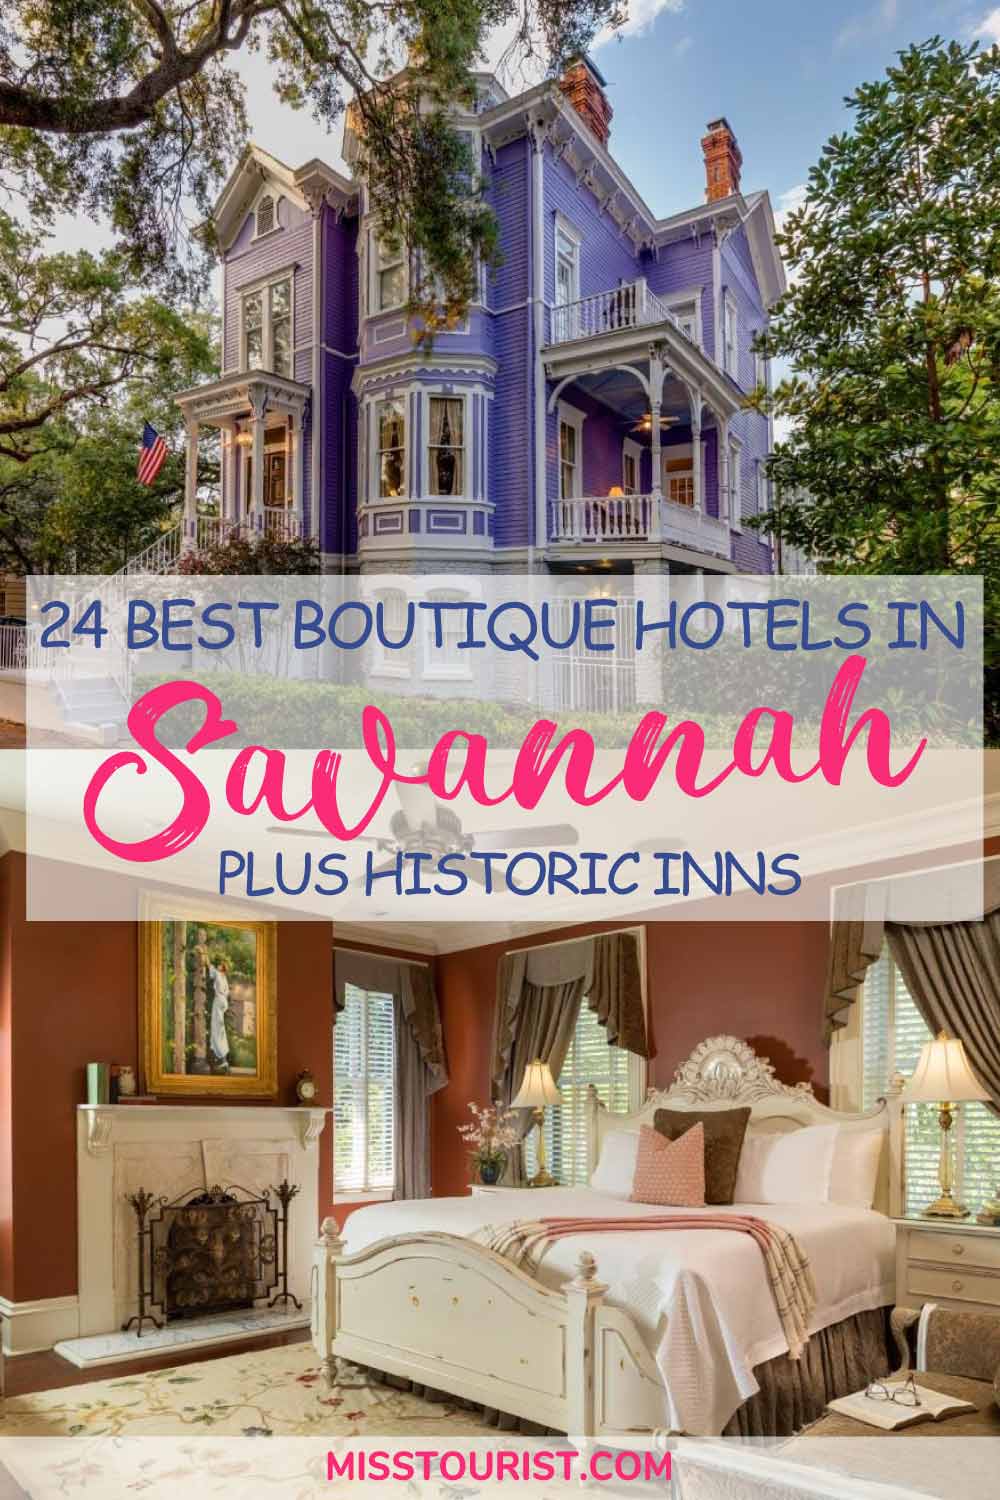 Boutique Hotels in Savannah Pin 3